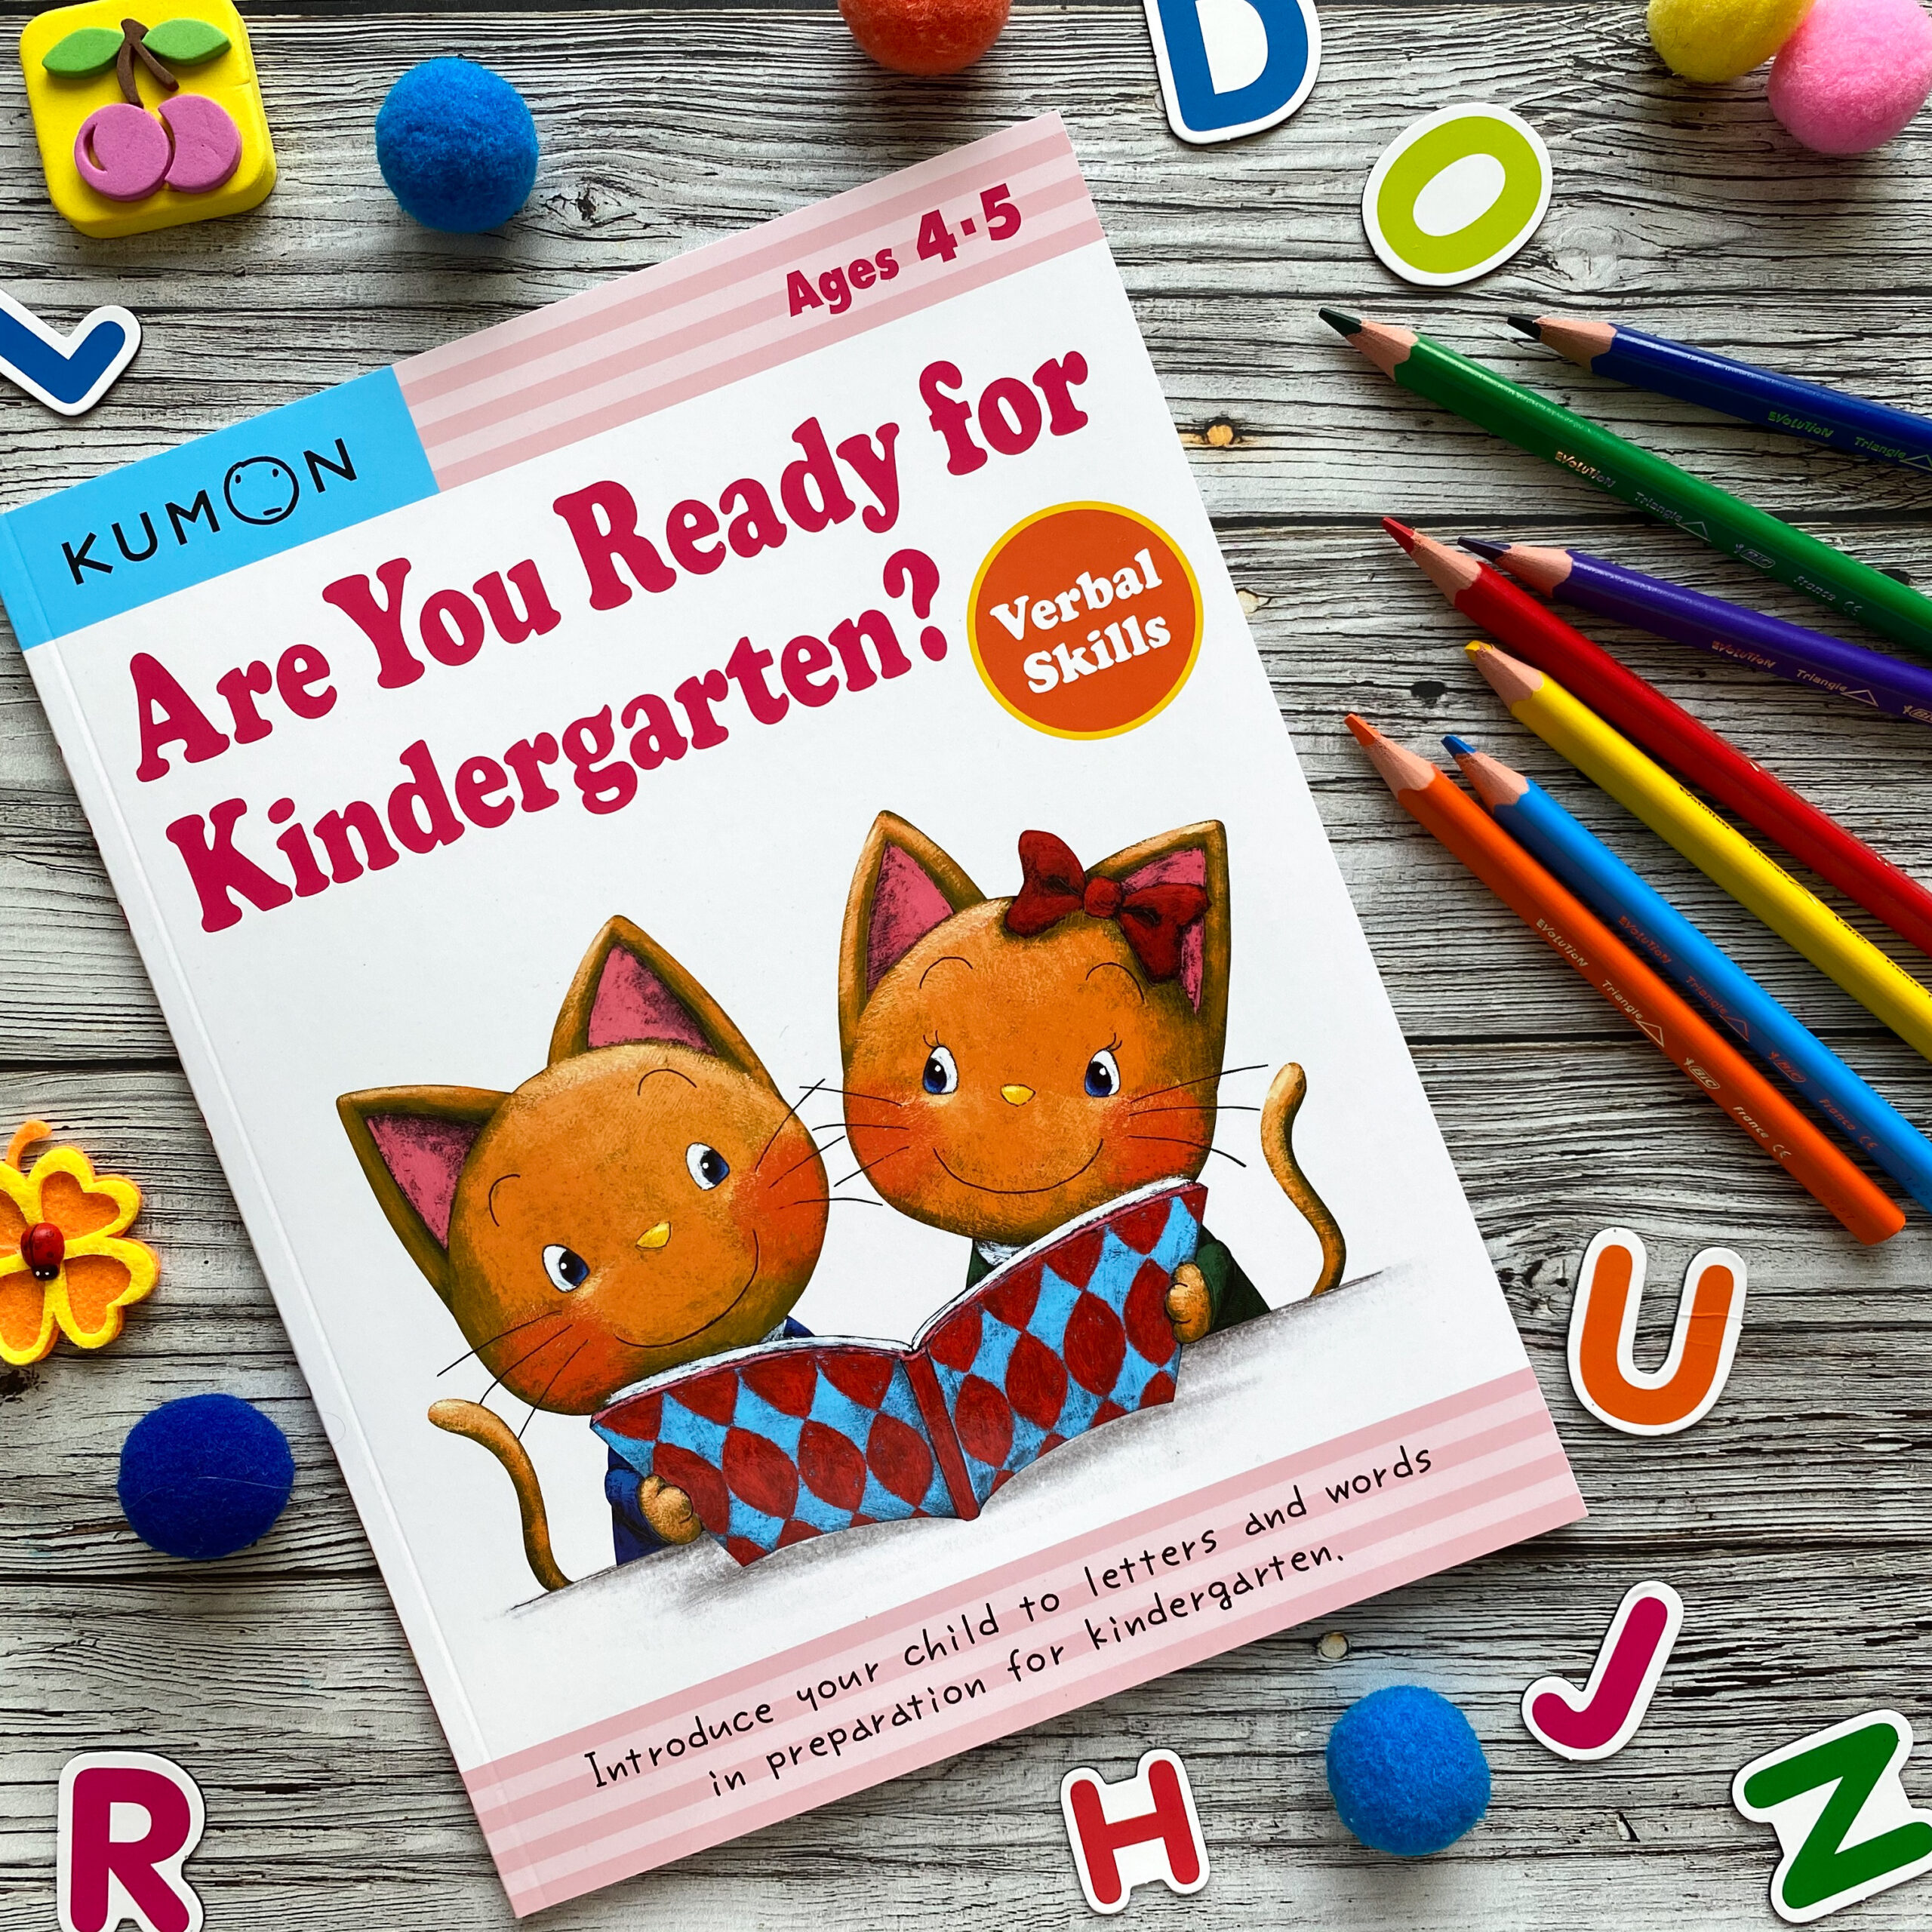 Are You Ready For Kindergarden? Verbal Skills, 4-5